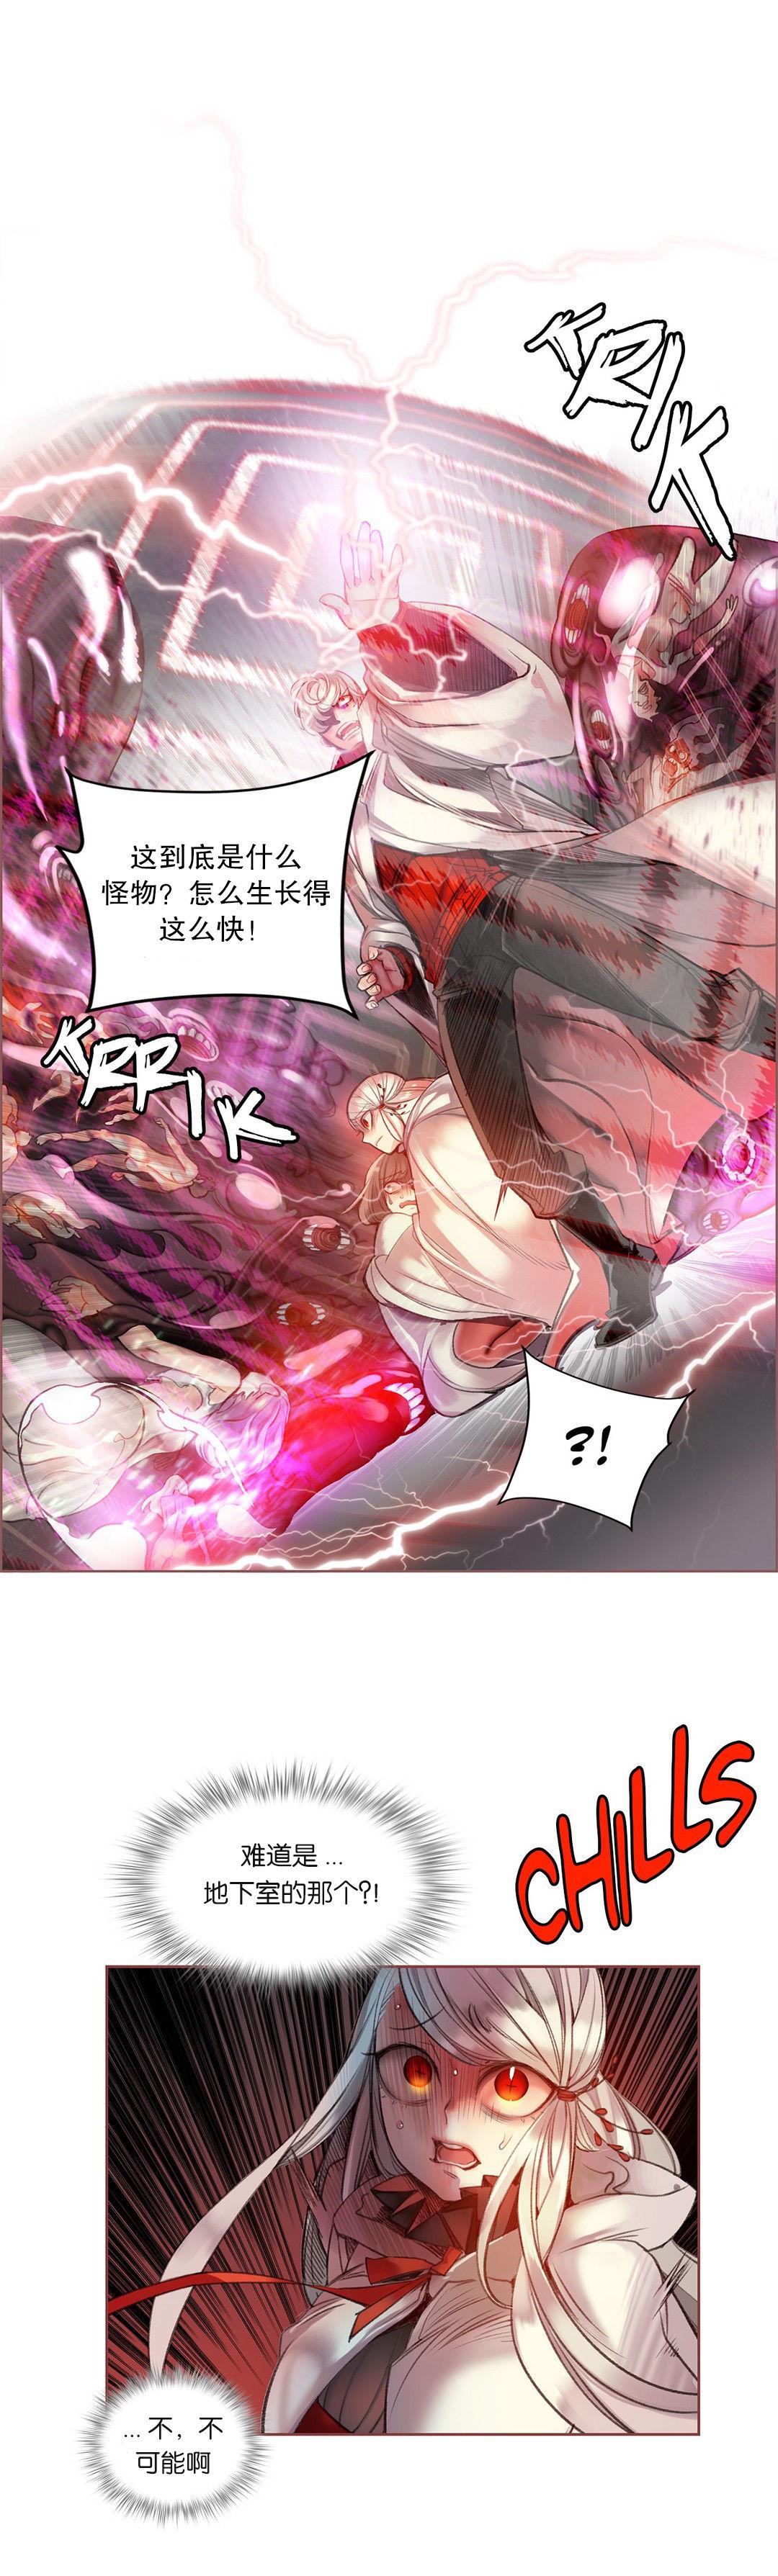 [Juder] Lilith`s Cord (第二季) Ch.61-68 [Chinese] [aaatwist个人汉化] [Ongoing] 20